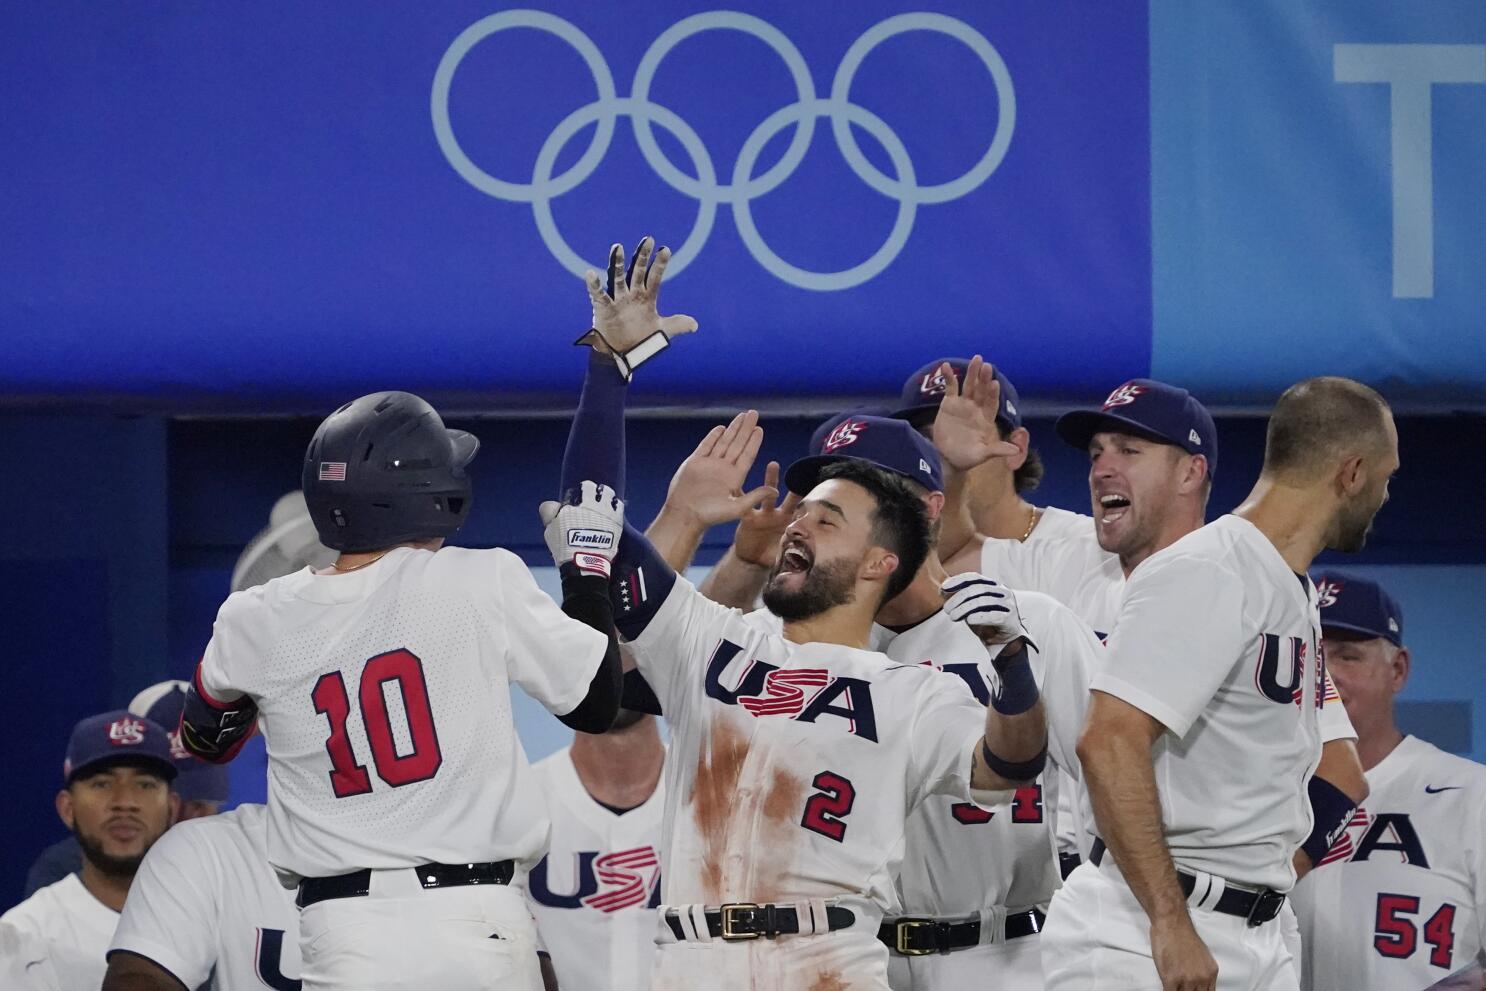 Baseball approved as a 2028 L.A. Olympic sport, but will MLB stars